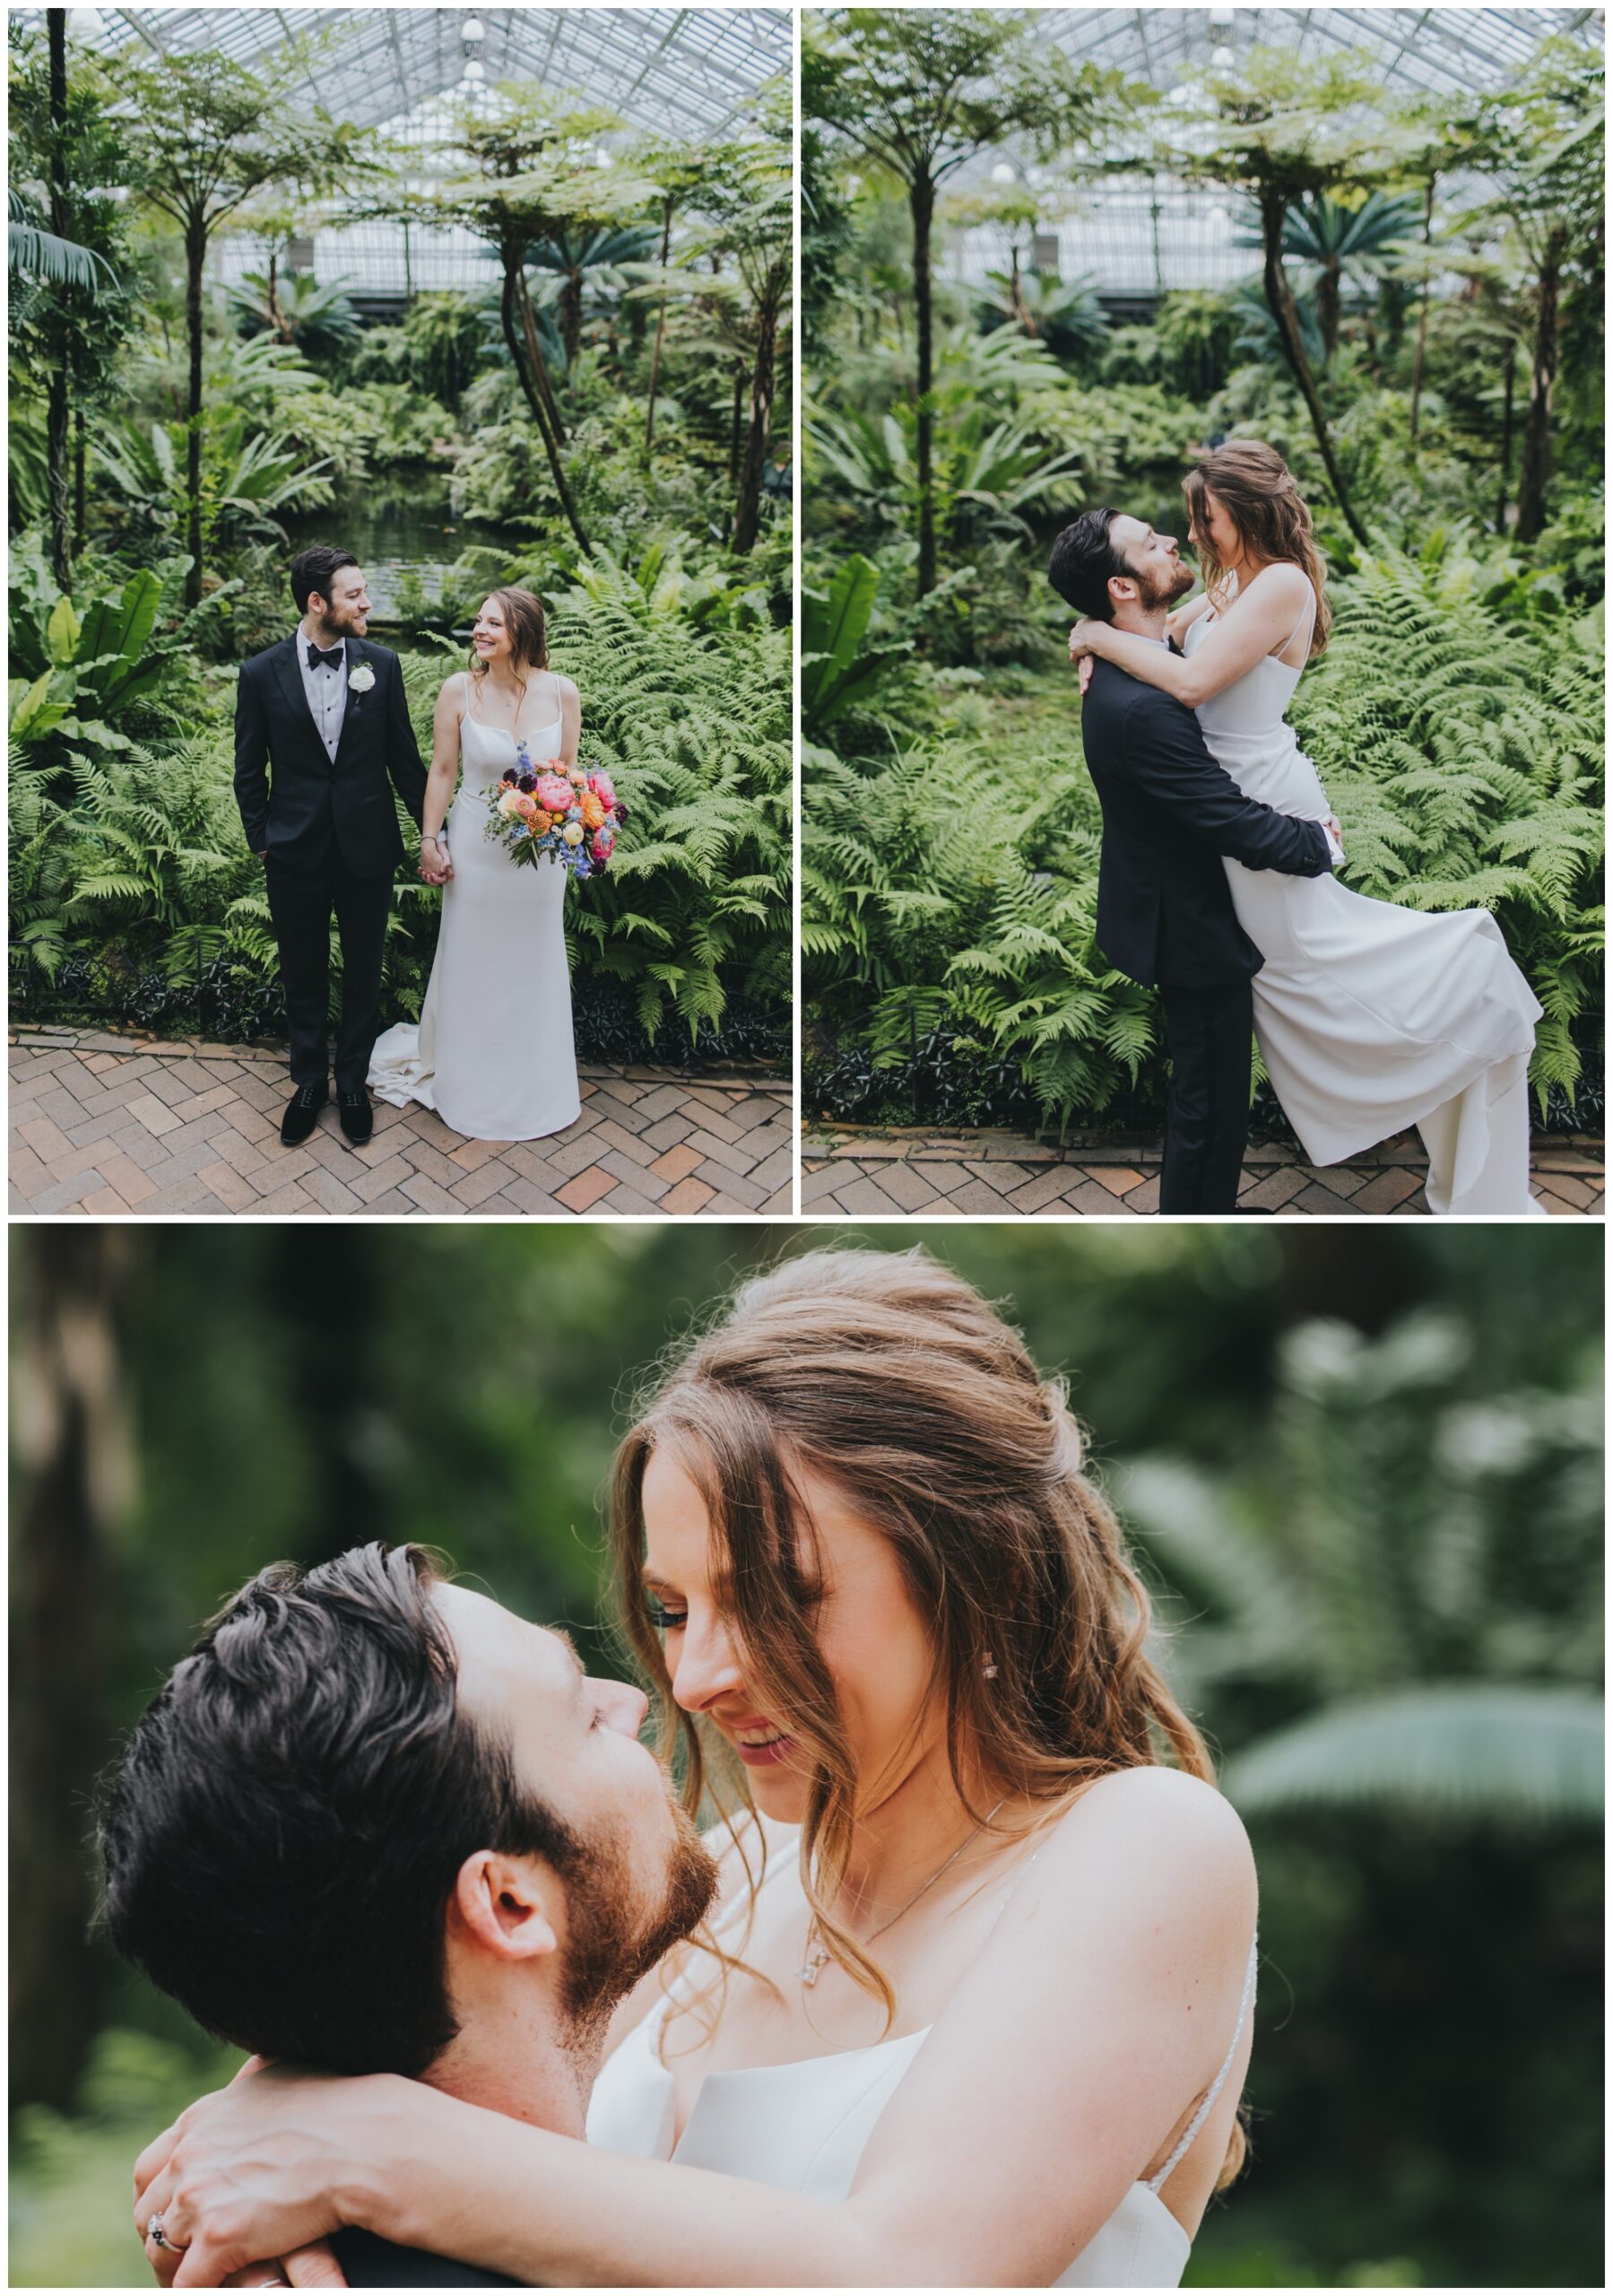 couples portraits; wedding portraits at Garfield Conservatory Chicago